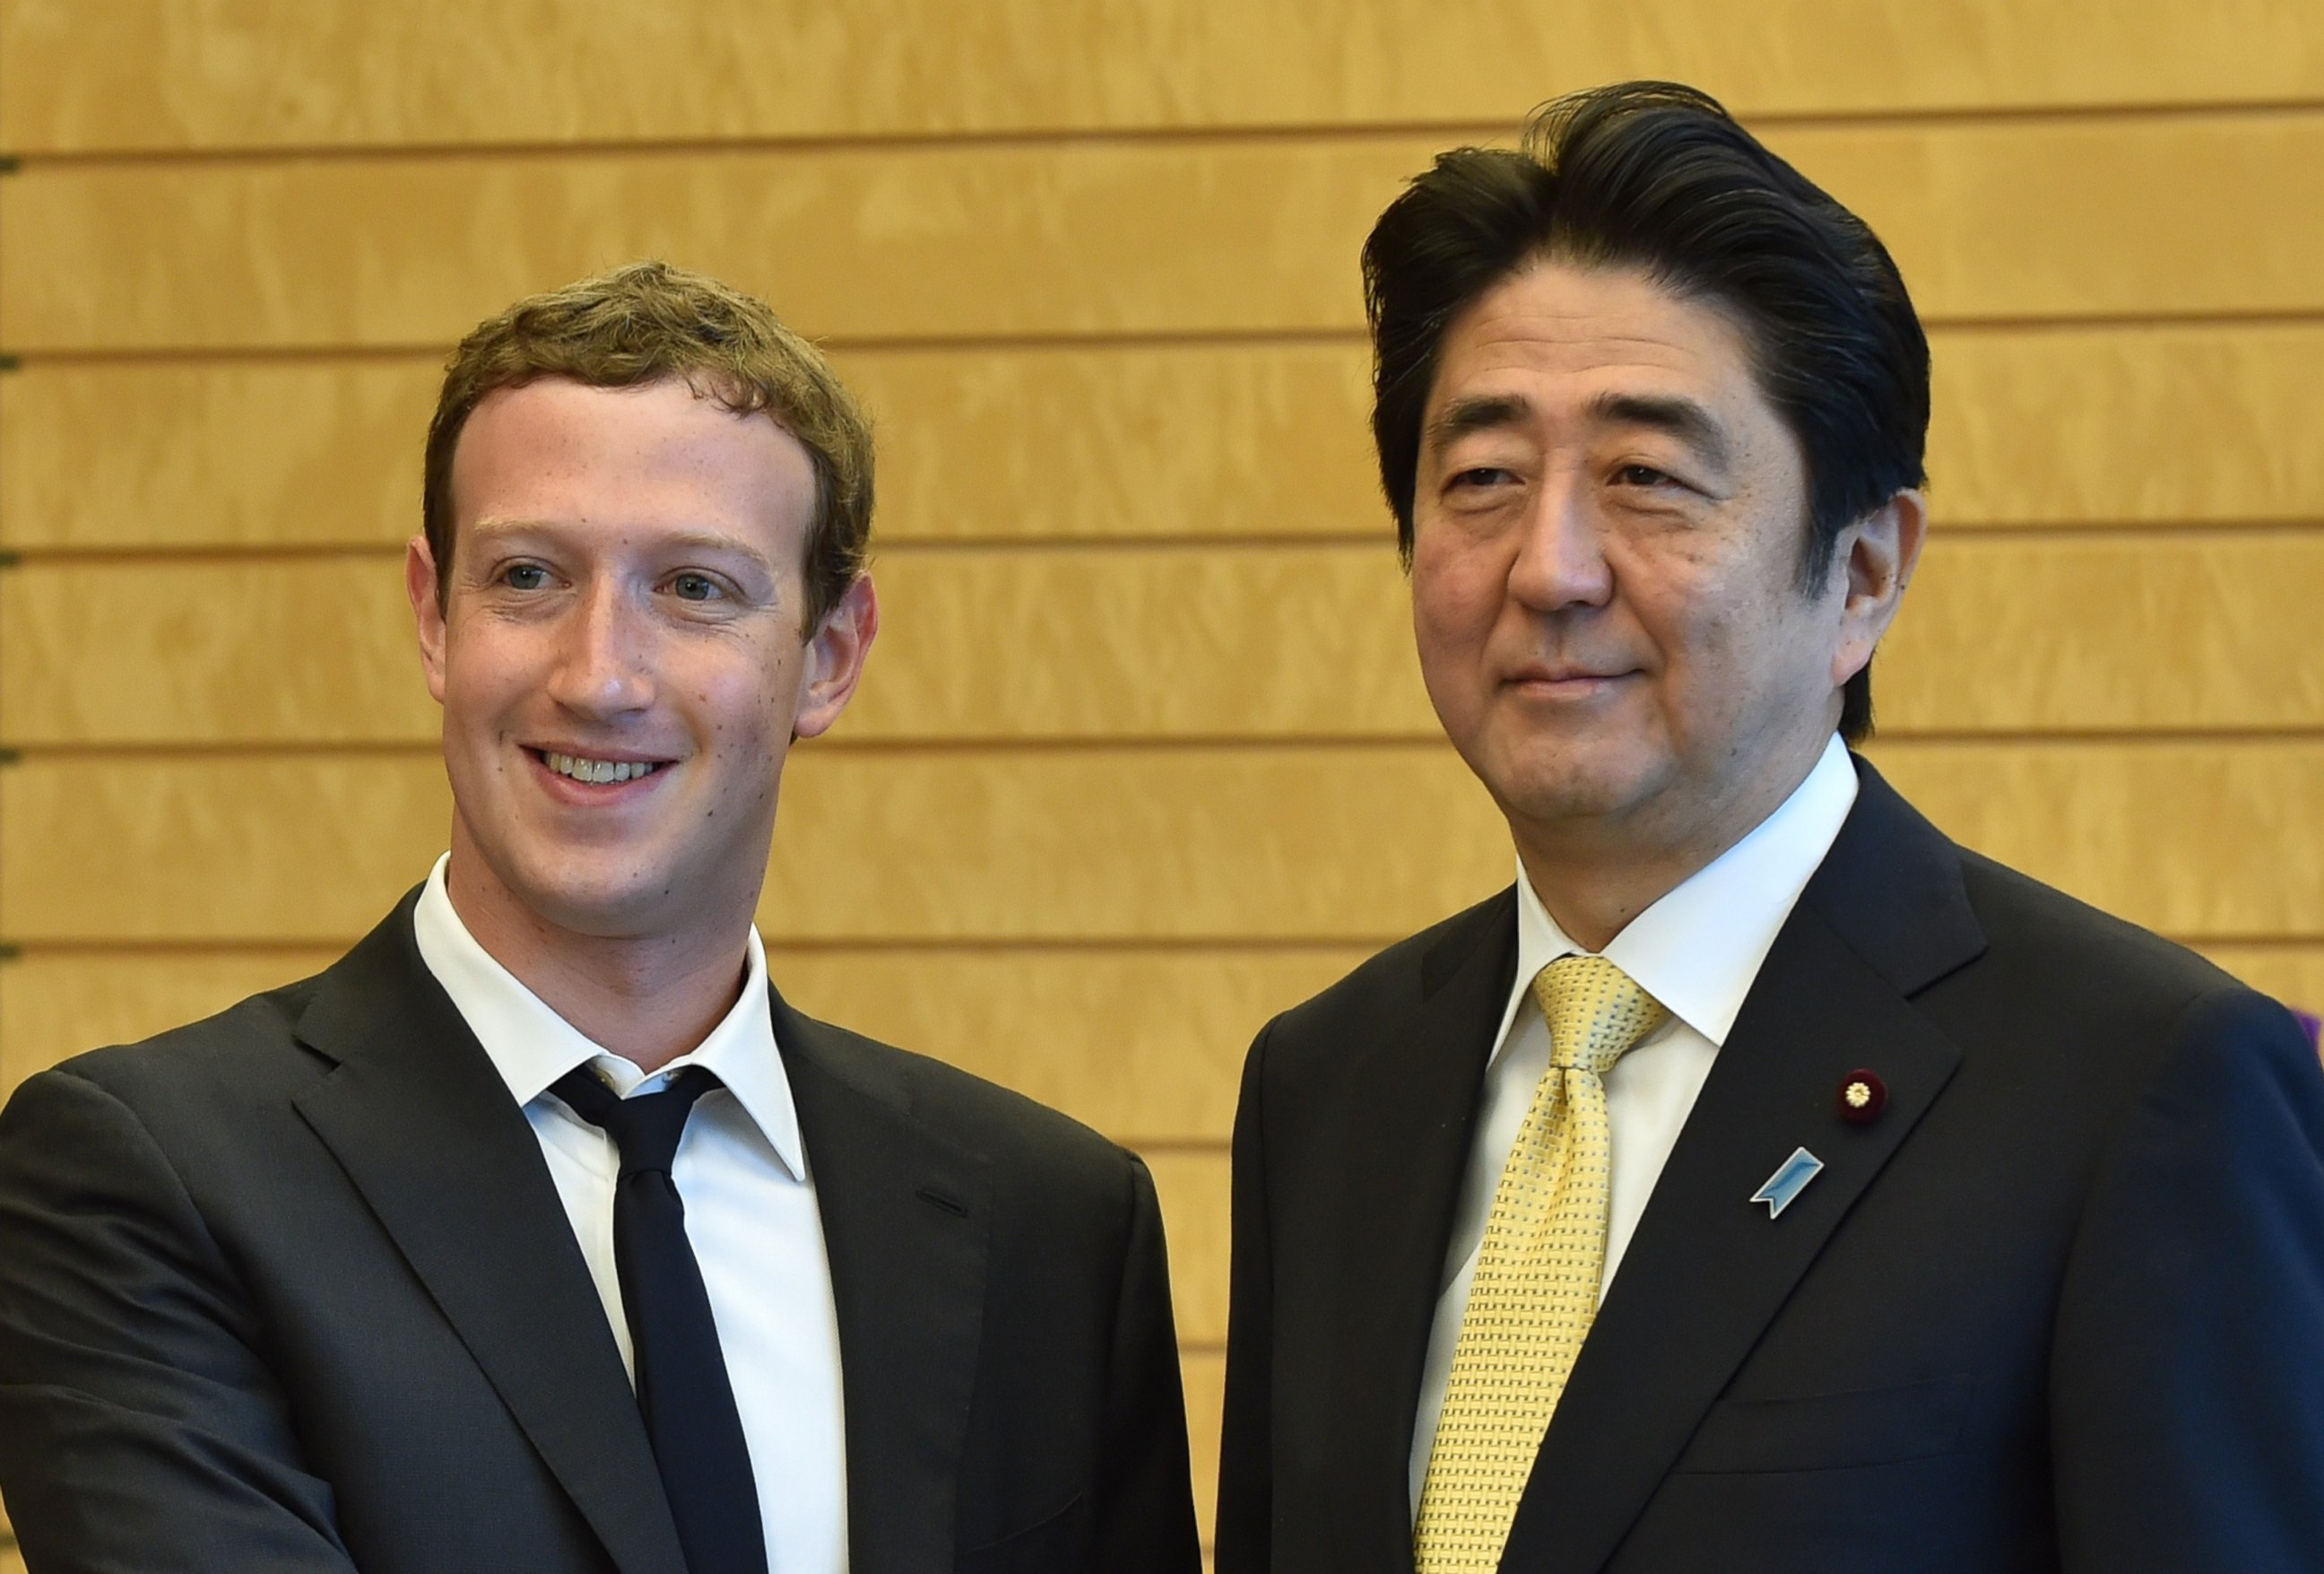 PHOTO: Mark Zuckerberg is seen during a visit to the Japanese Prime Minister's official residence in Tokyo on Oct. 20, 2014. 